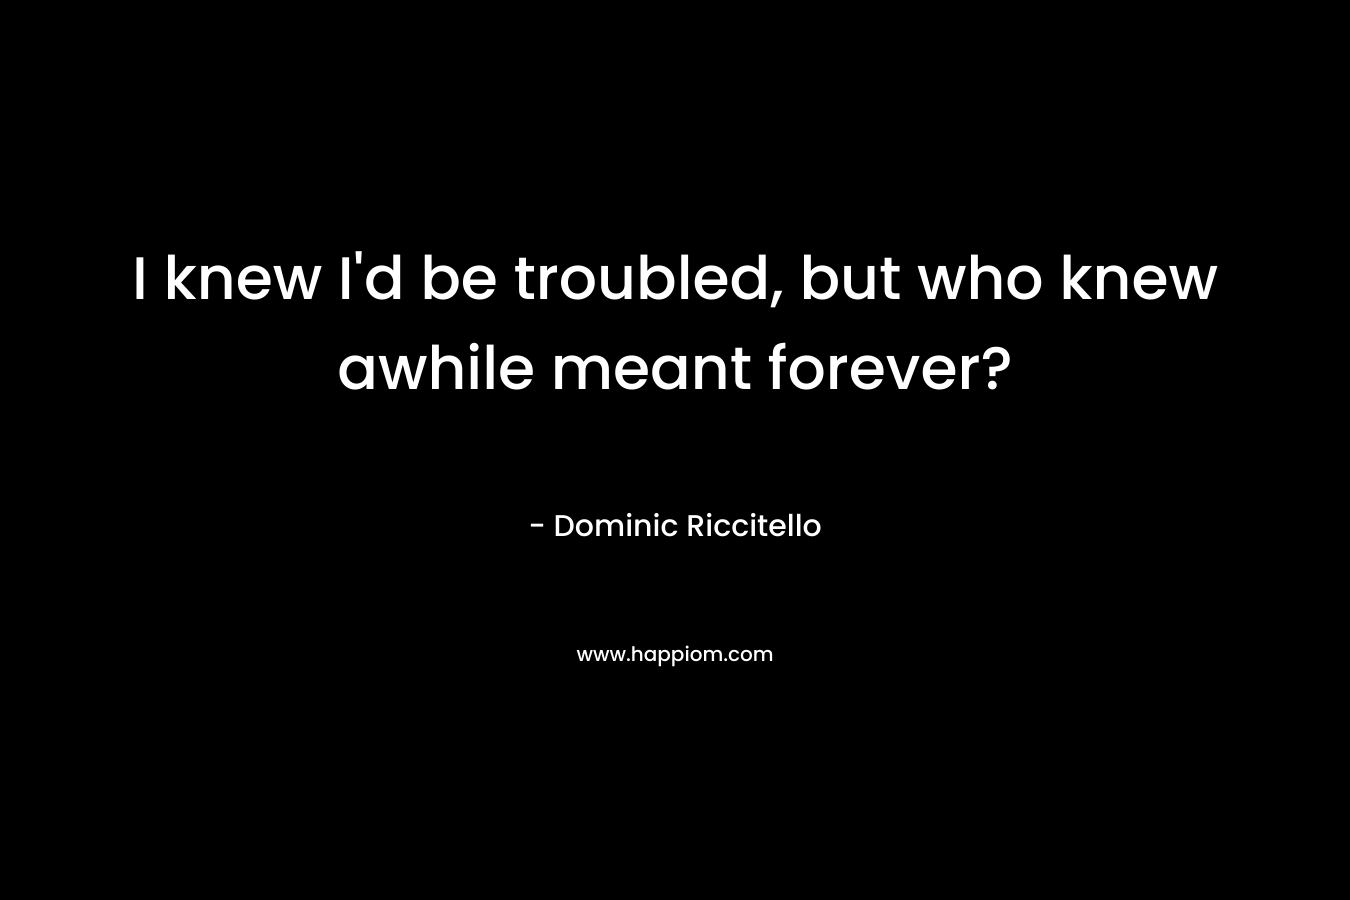 I knew I’d be troubled, but who knew awhile meant forever? – Dominic Riccitello